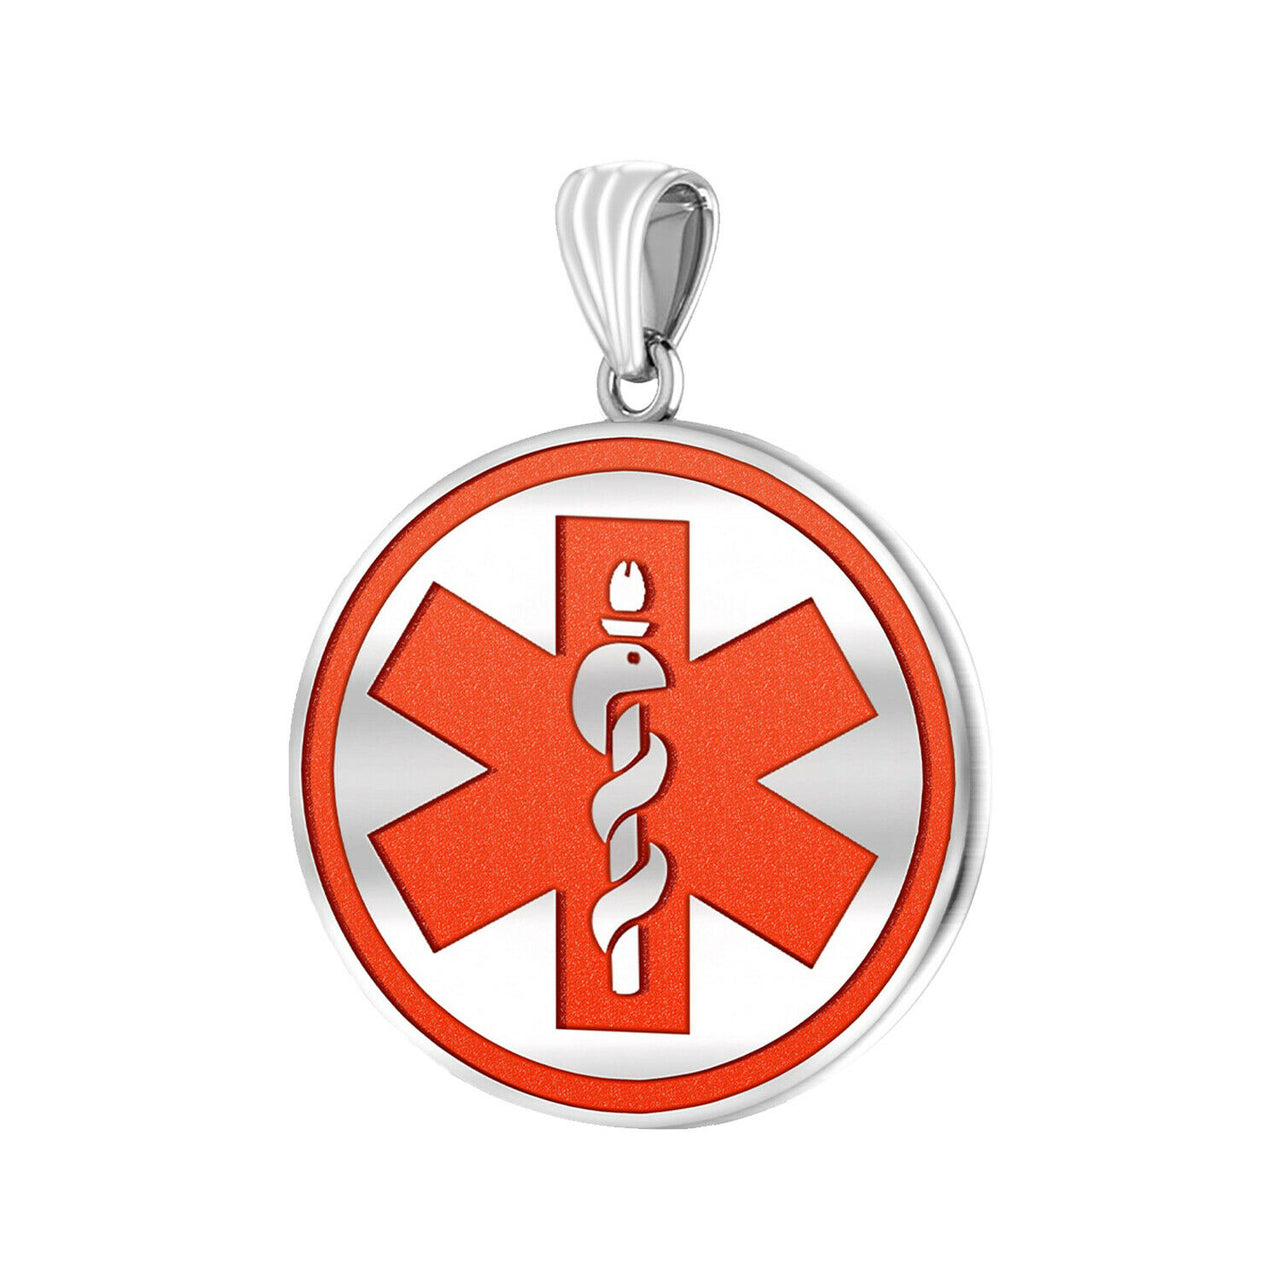 925 Sterling Silver Round Medical Pendant, 25mm